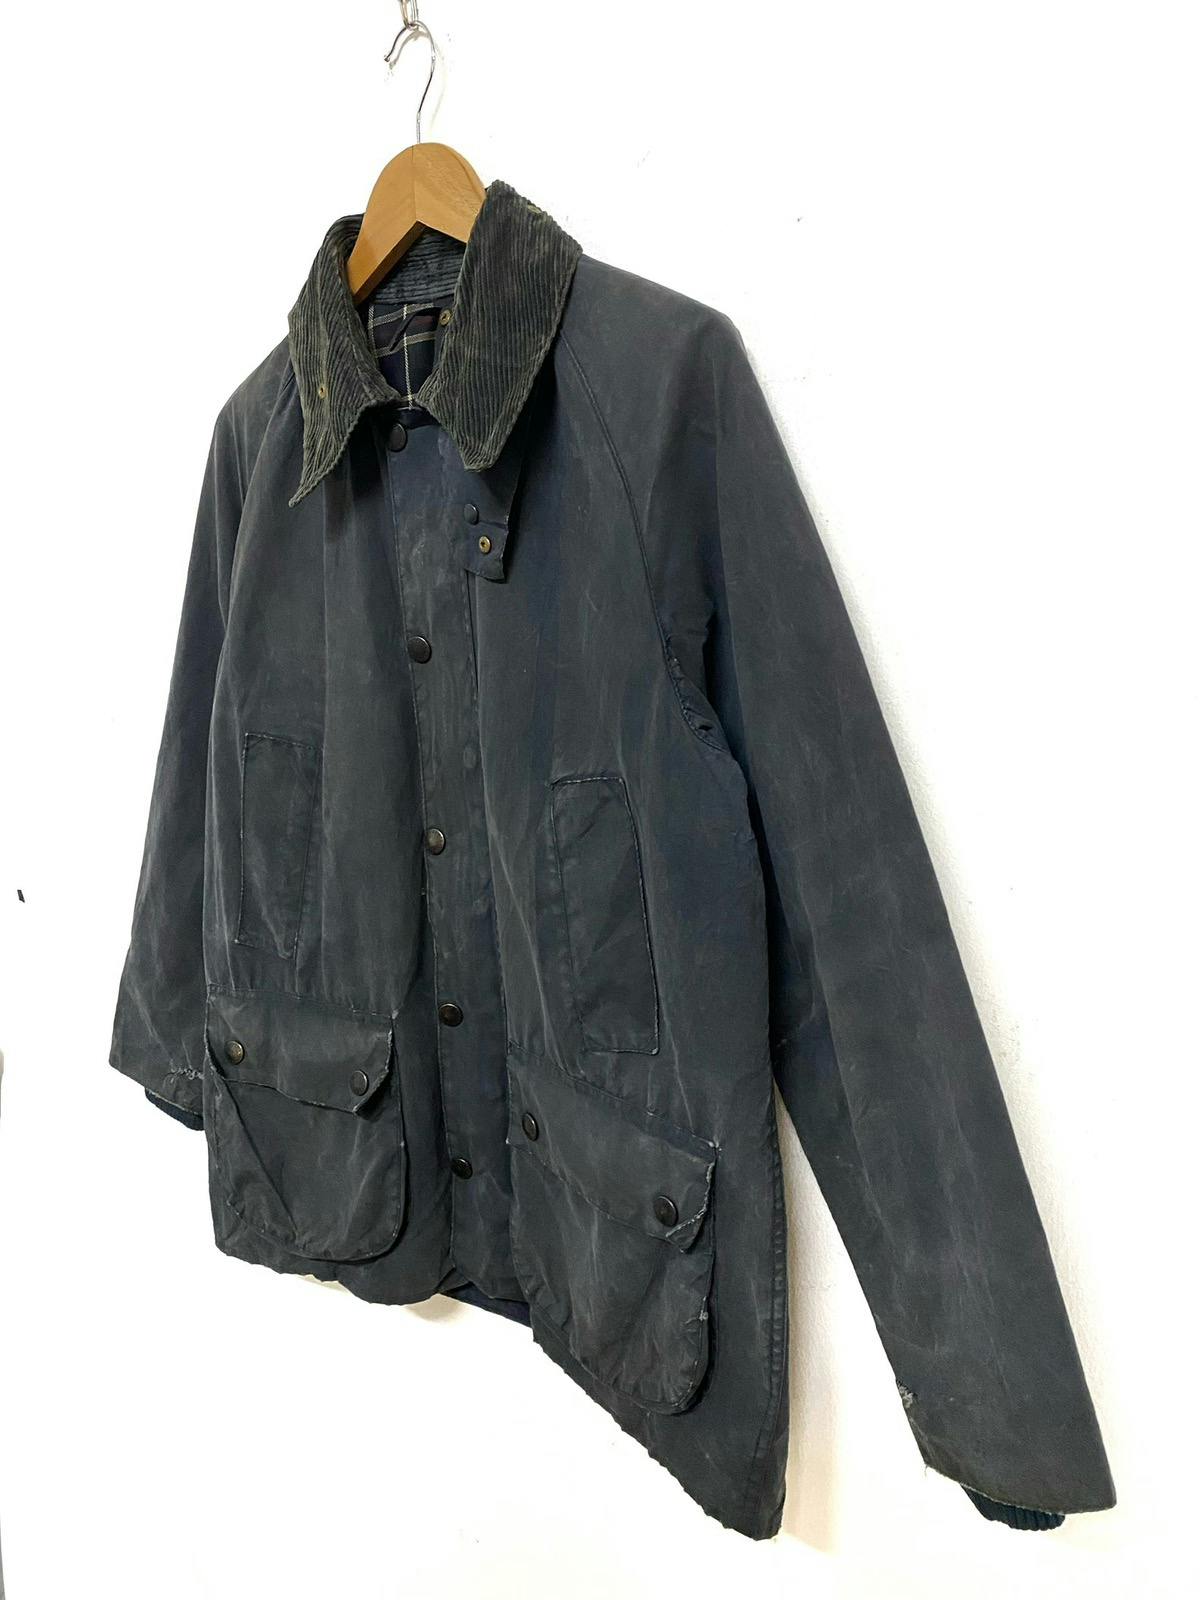 Barbour Bedale A105 Wax Jacket Made in England - 6